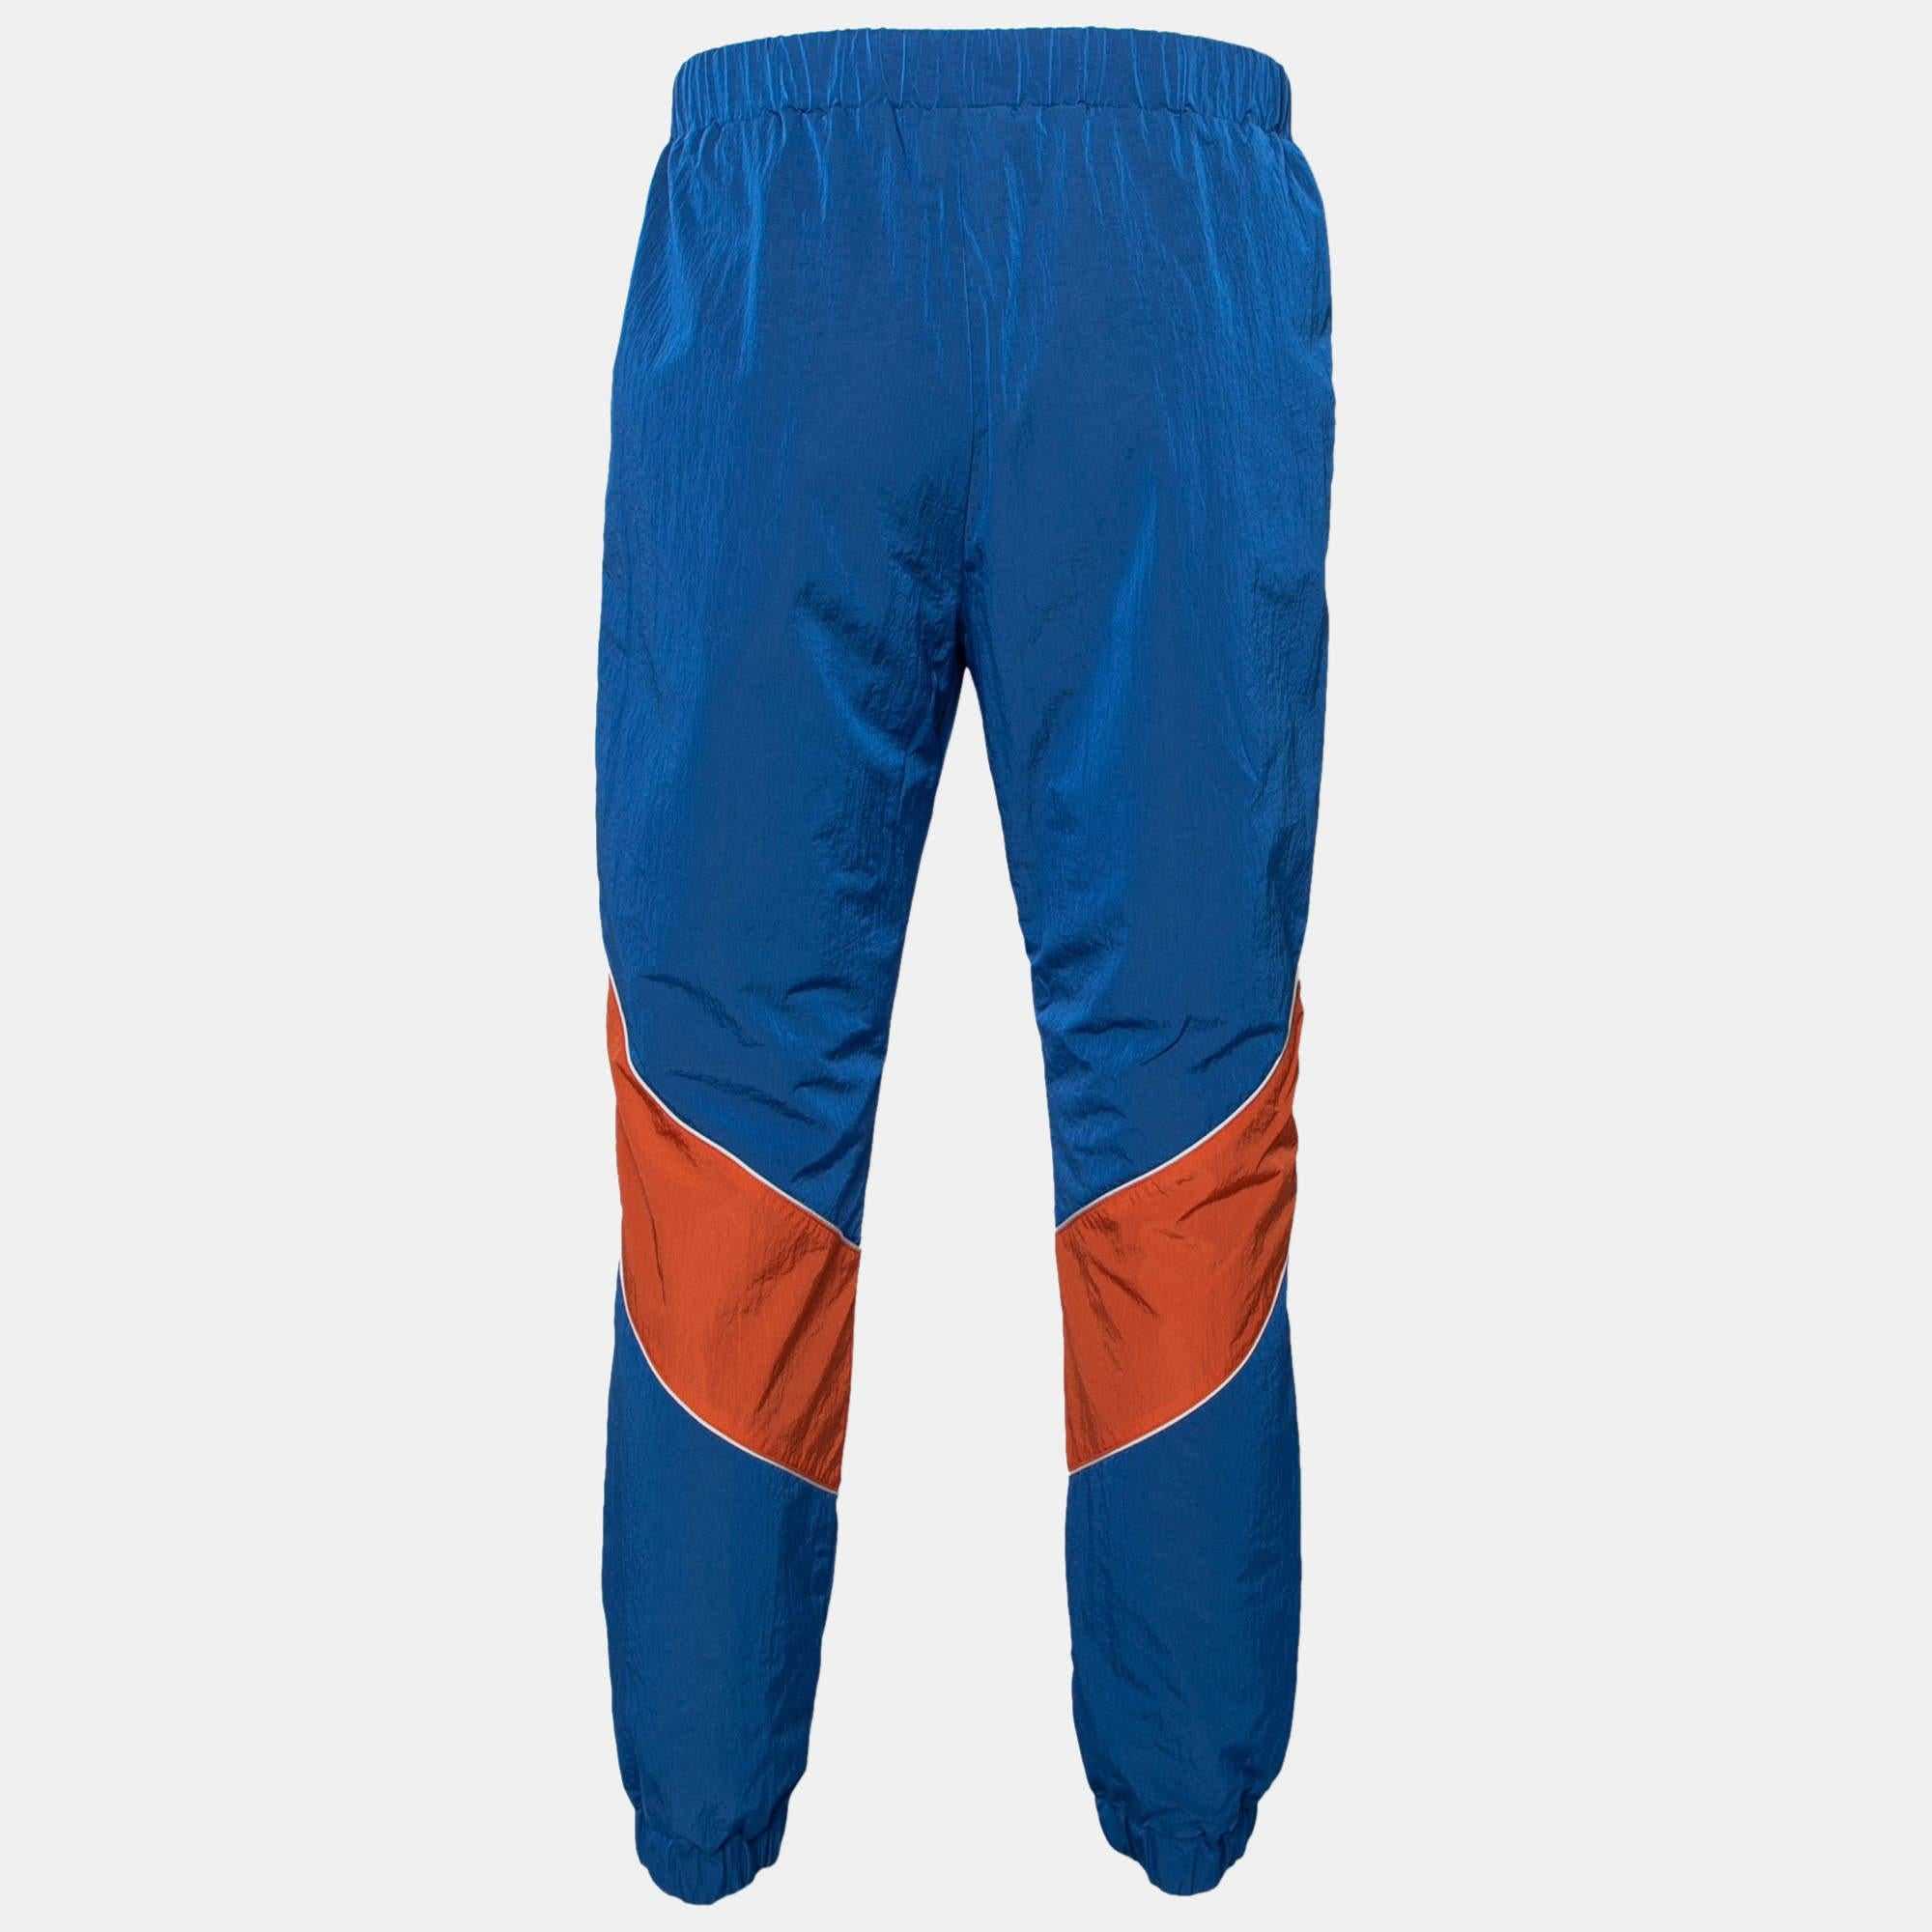 To give you comfort and high style, Gucci brings you this creation that has been made from quality fabrics and designed with an elasticized waist and stripe panels that resemble the signature Web stripes. This pair of track pants will surely be a